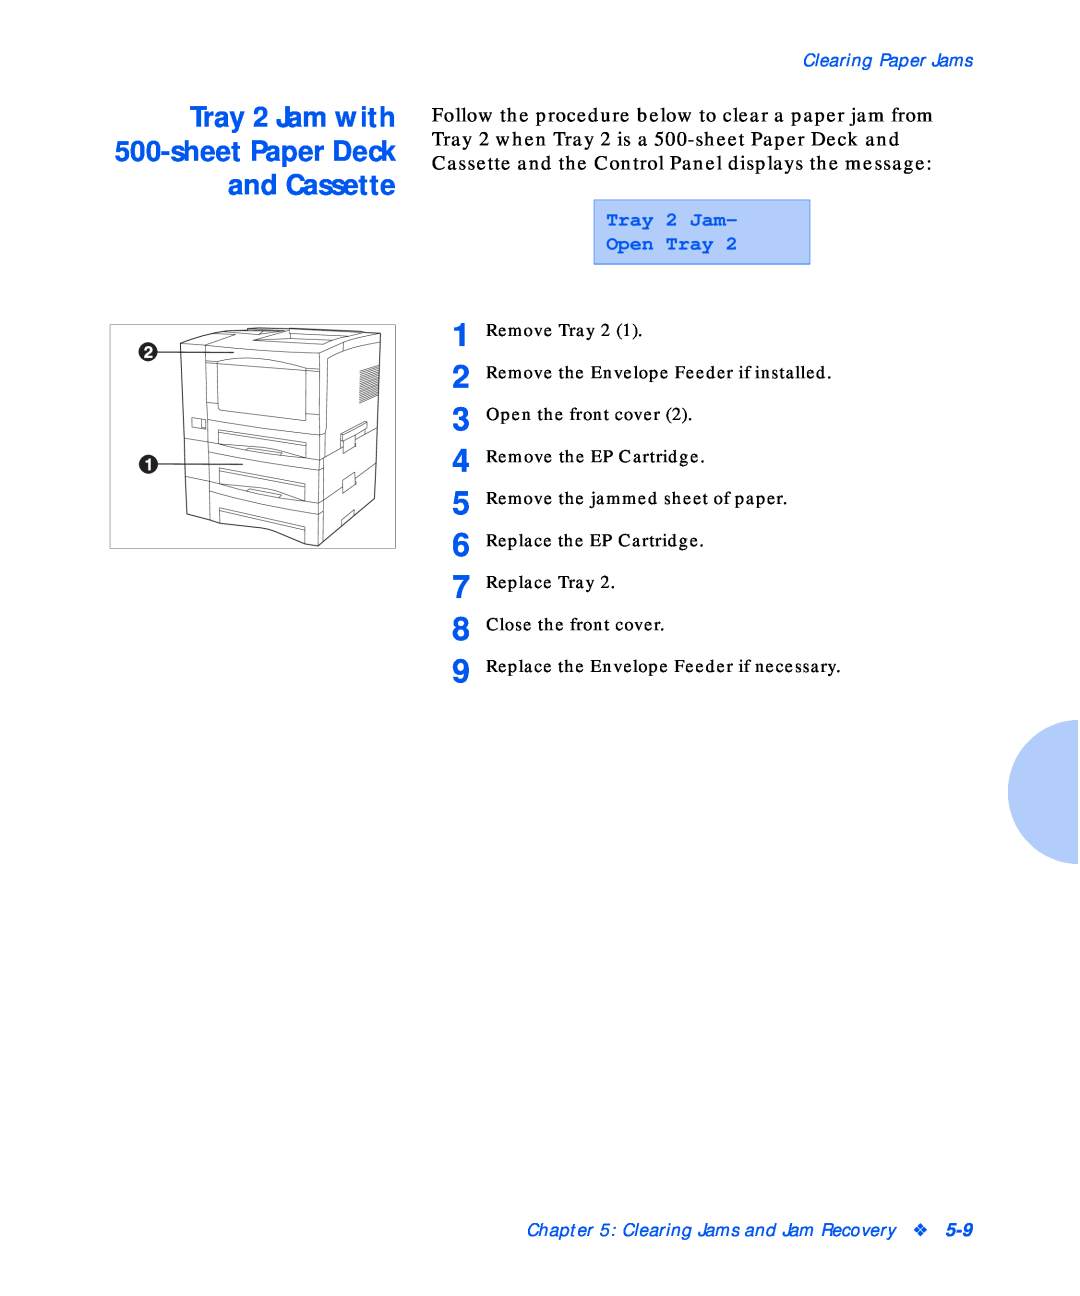 Xerox N17b manual Tray 2 Jam with 500-sheetPaper Deck and Cassette, Tray 2 Jam Open Tray, Clearing Paper Jams 